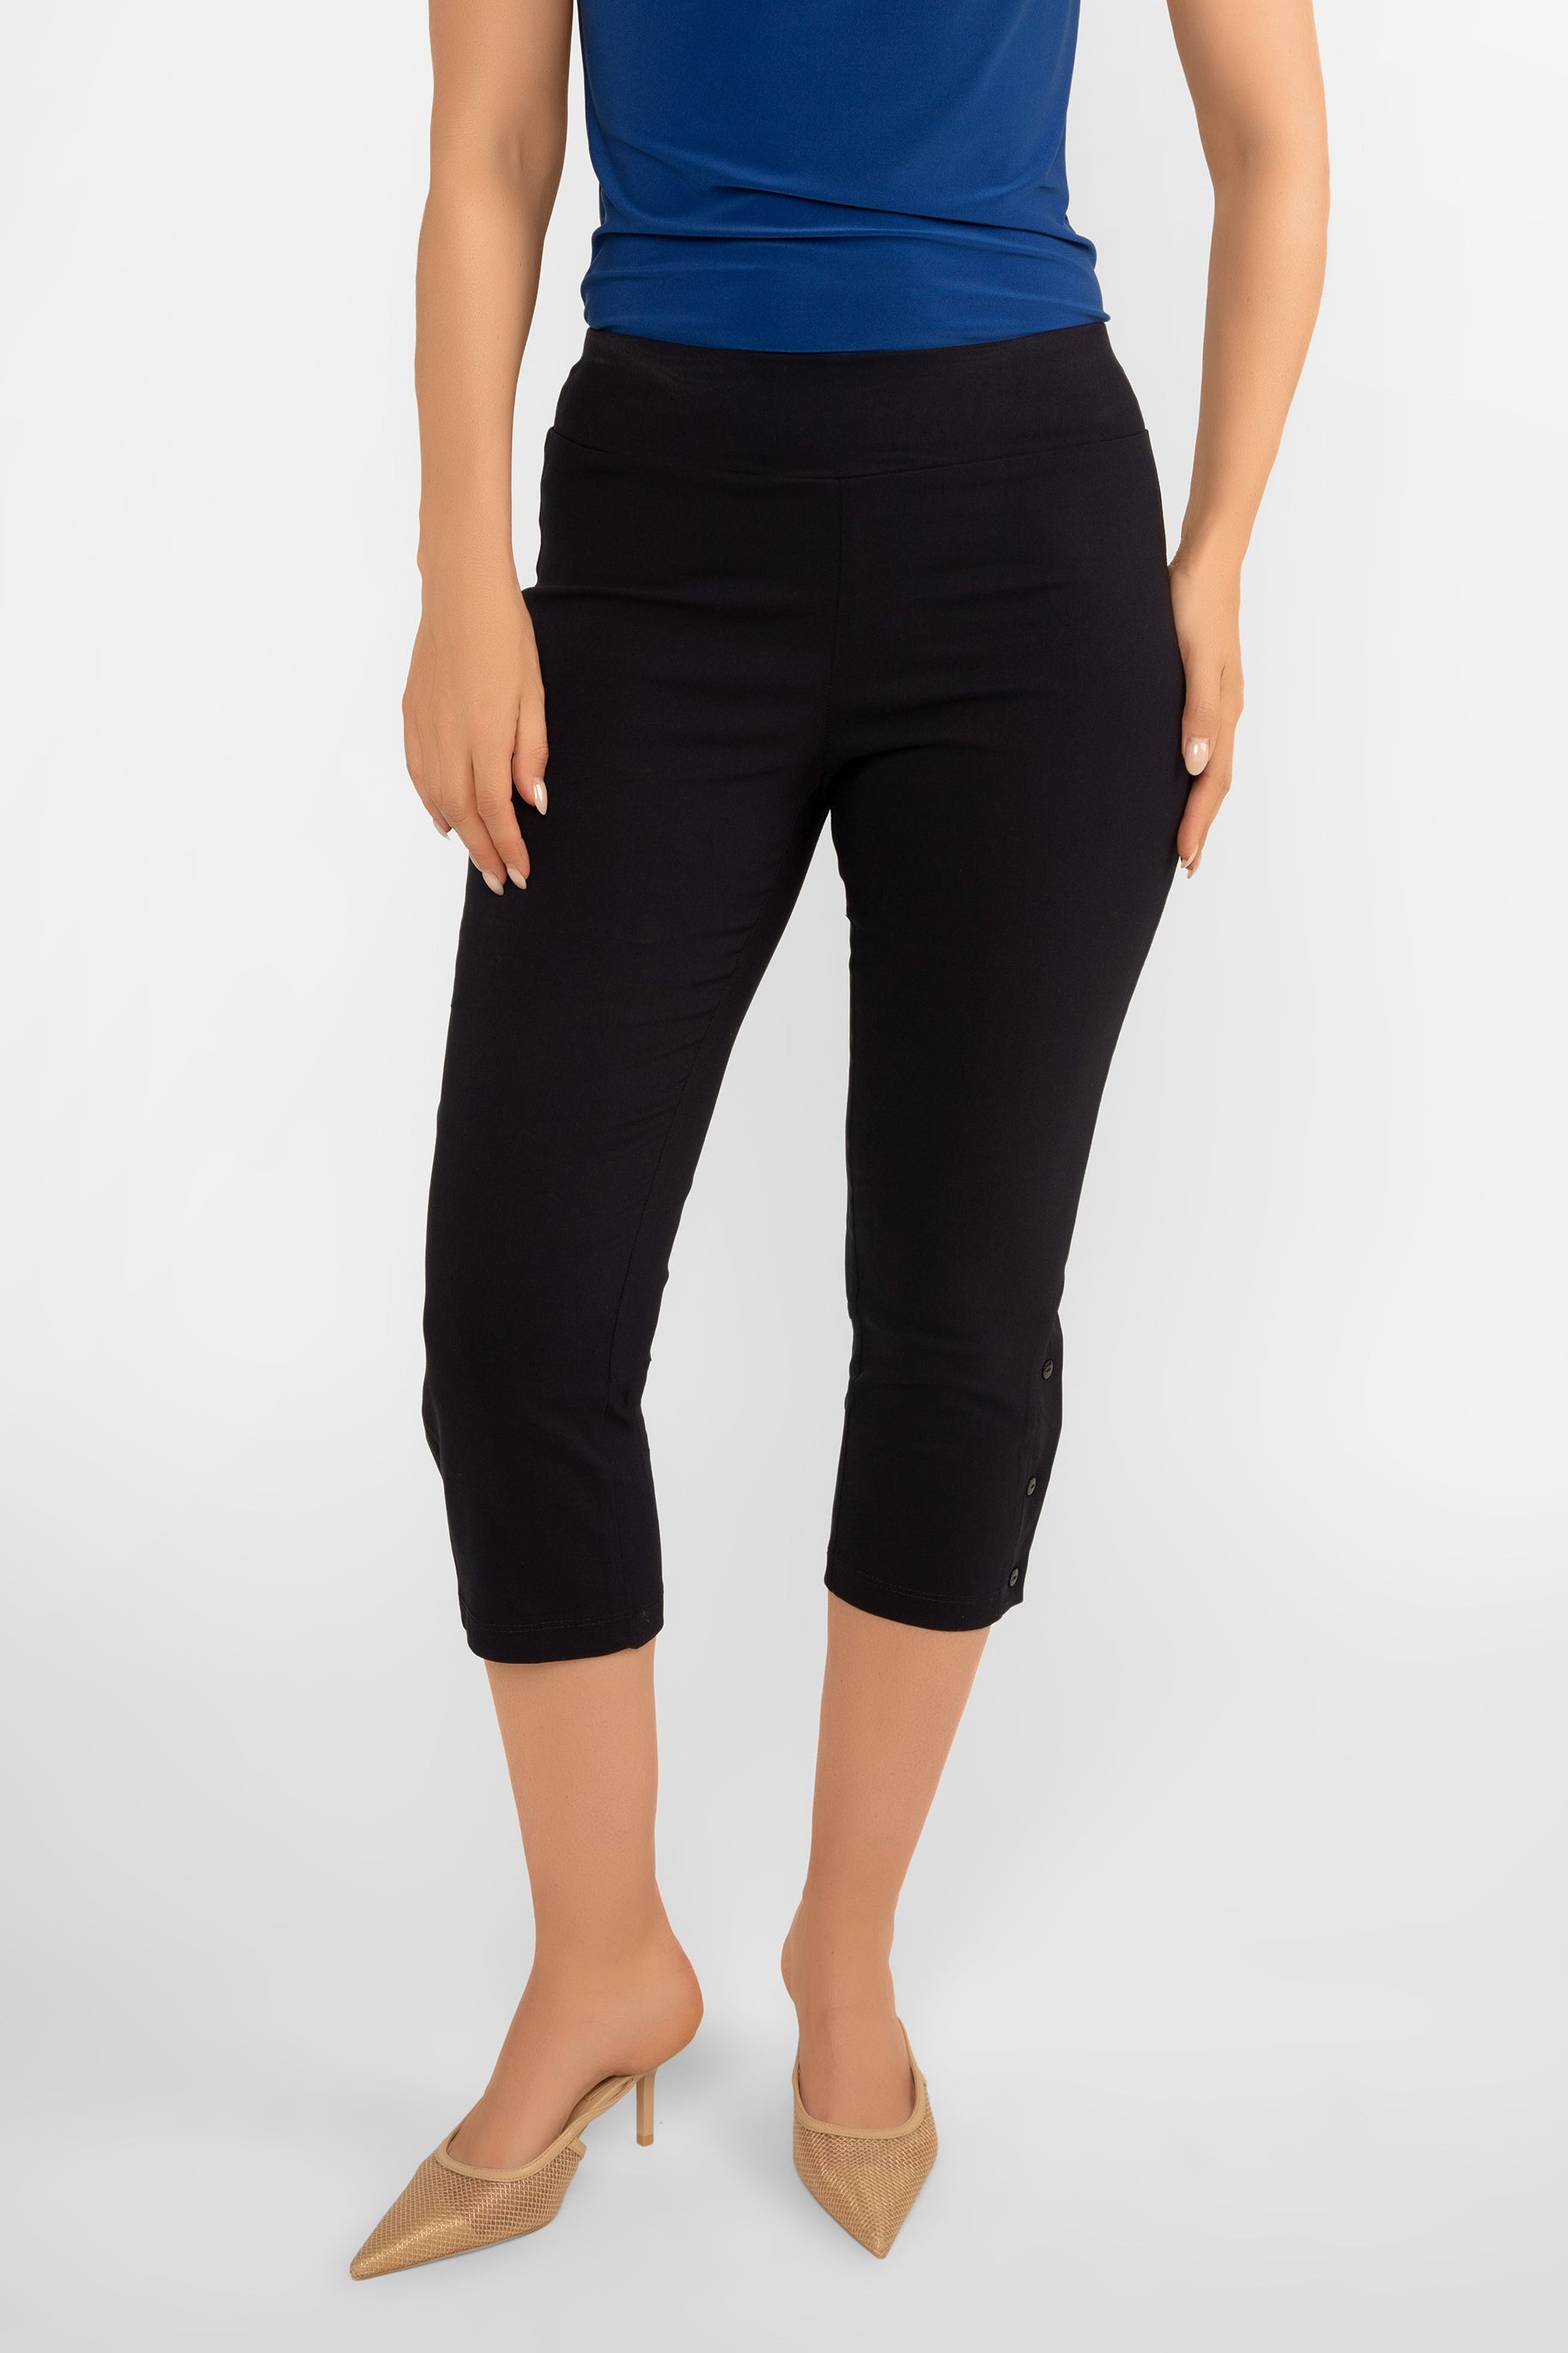 Picadilly (F M959 PR)  Women's Slim Fit Capris with button trim on hem in Capris  BluePicadilly (F M959 PR Women's Slim Fit Capris with button trim on hem in Navy